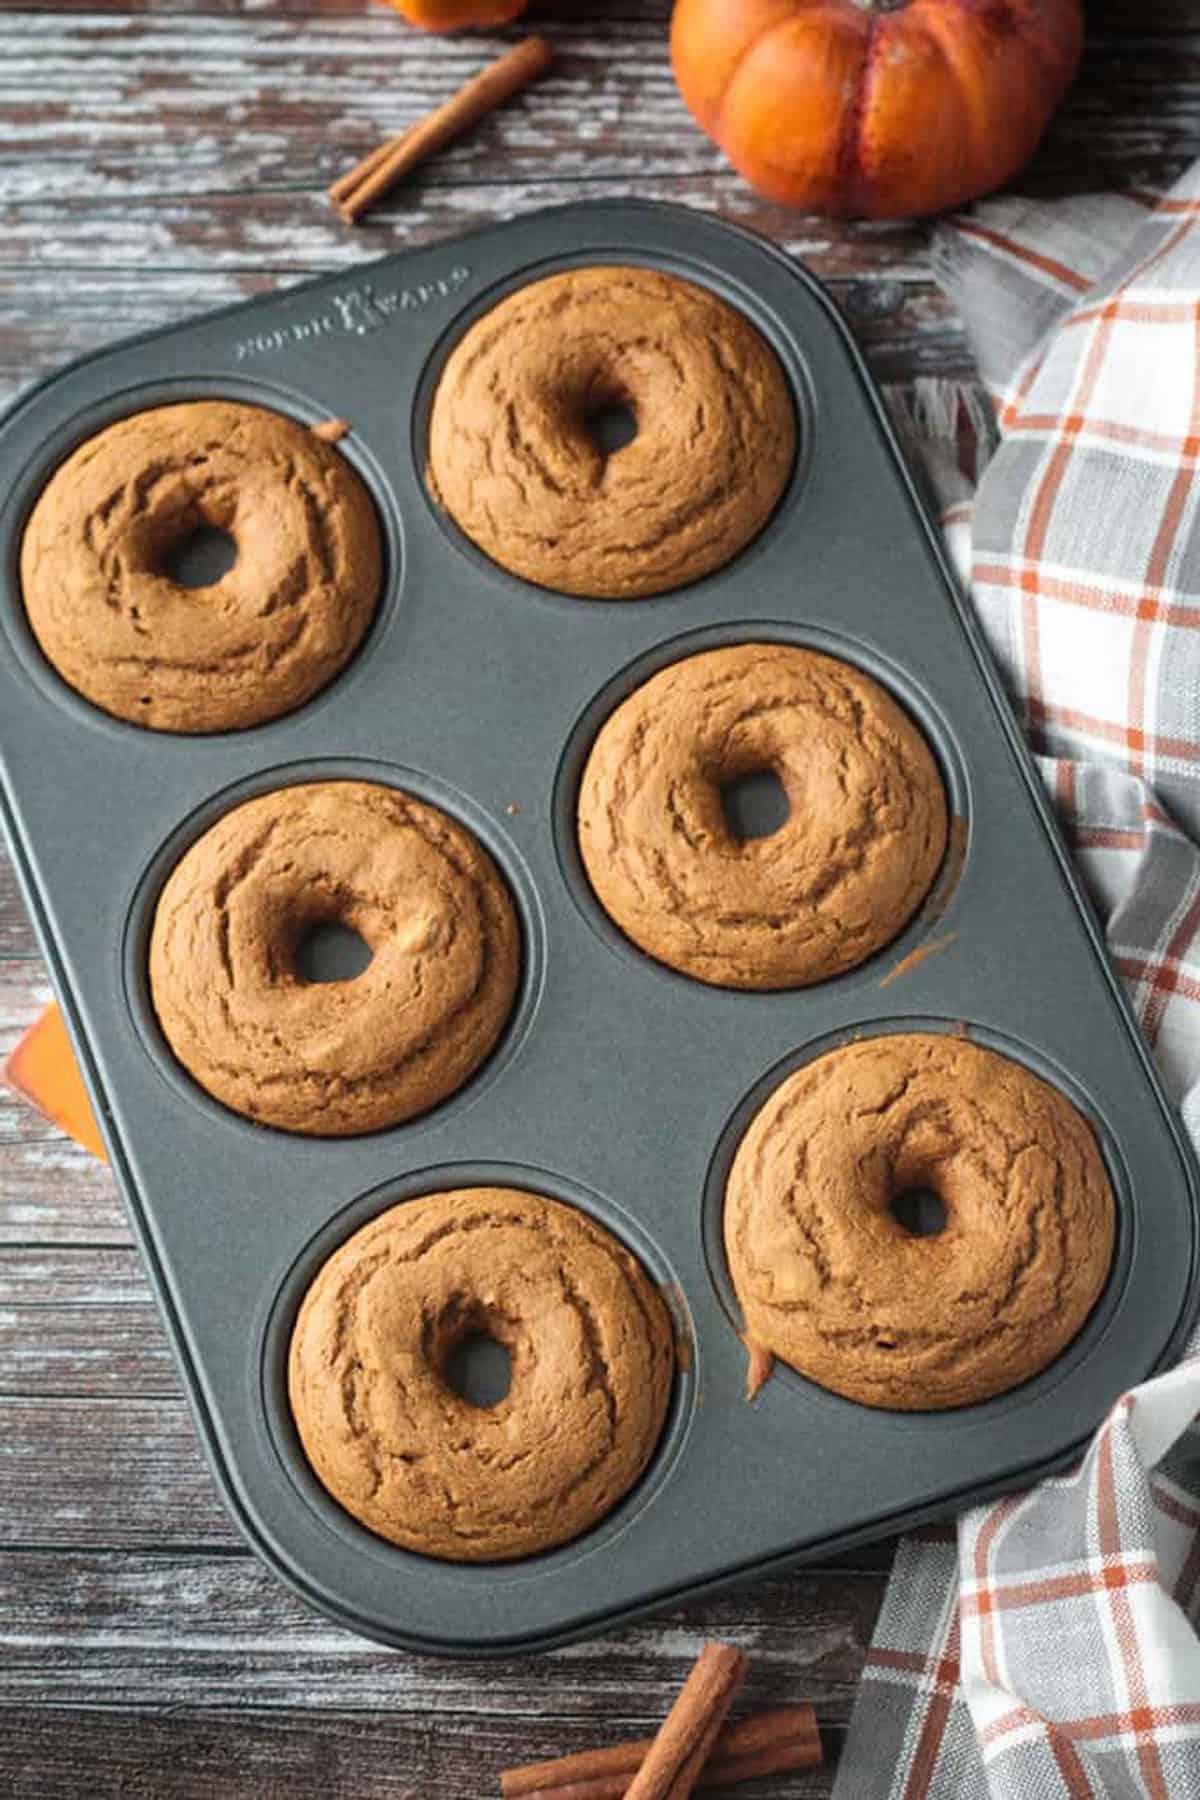 Donut pan with 6 baked donuts fresh from the oven.